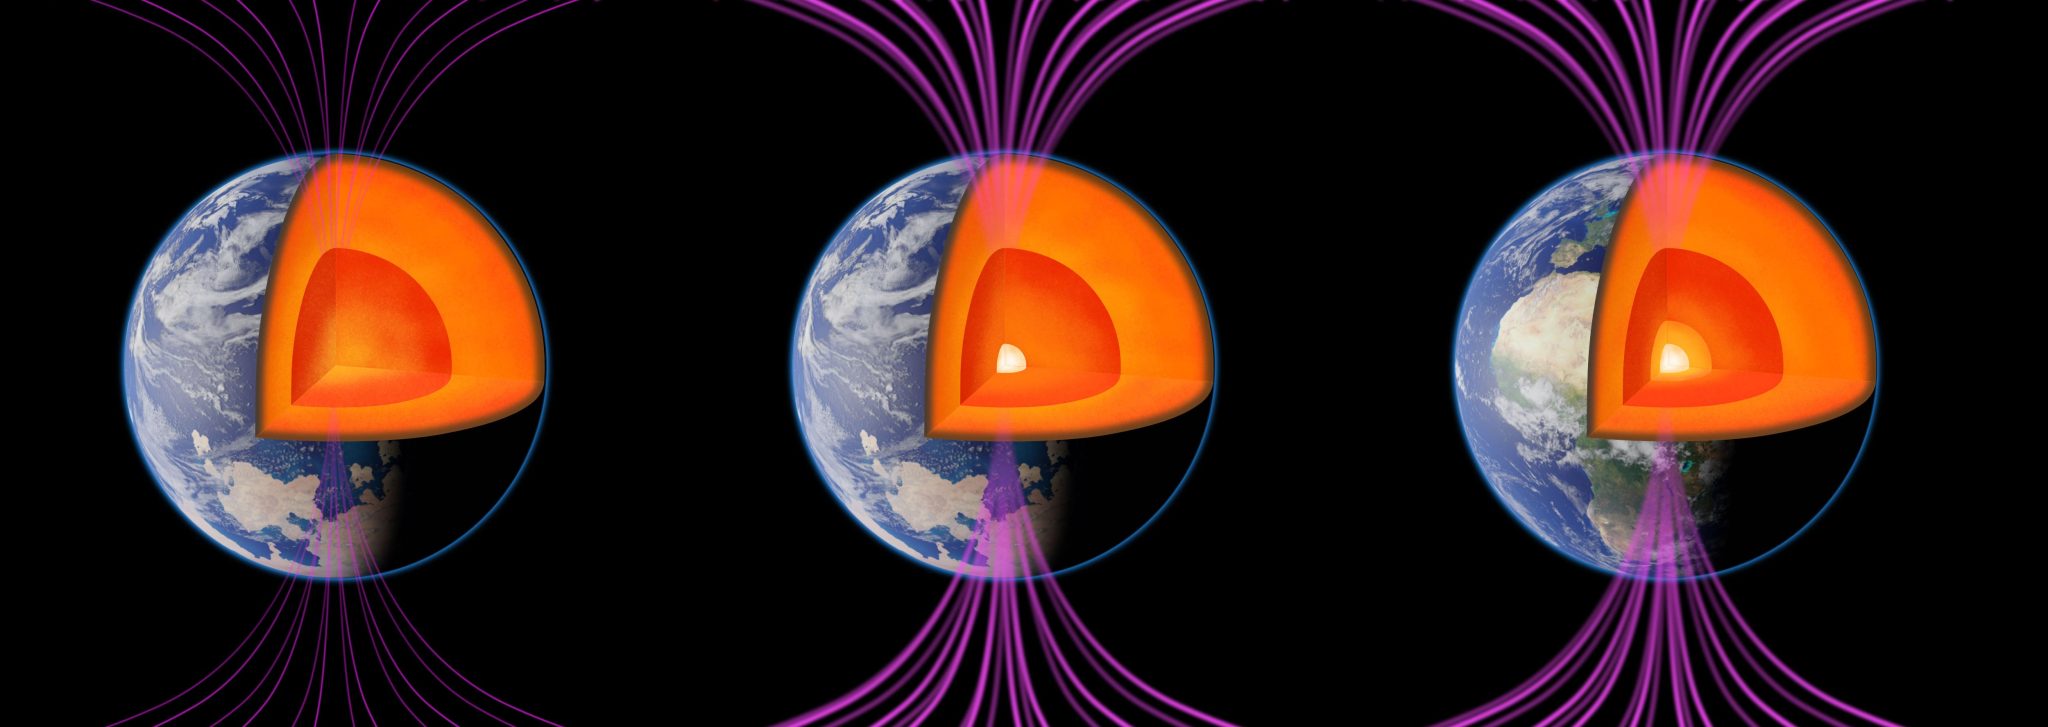 Formation of the Earth's inner core